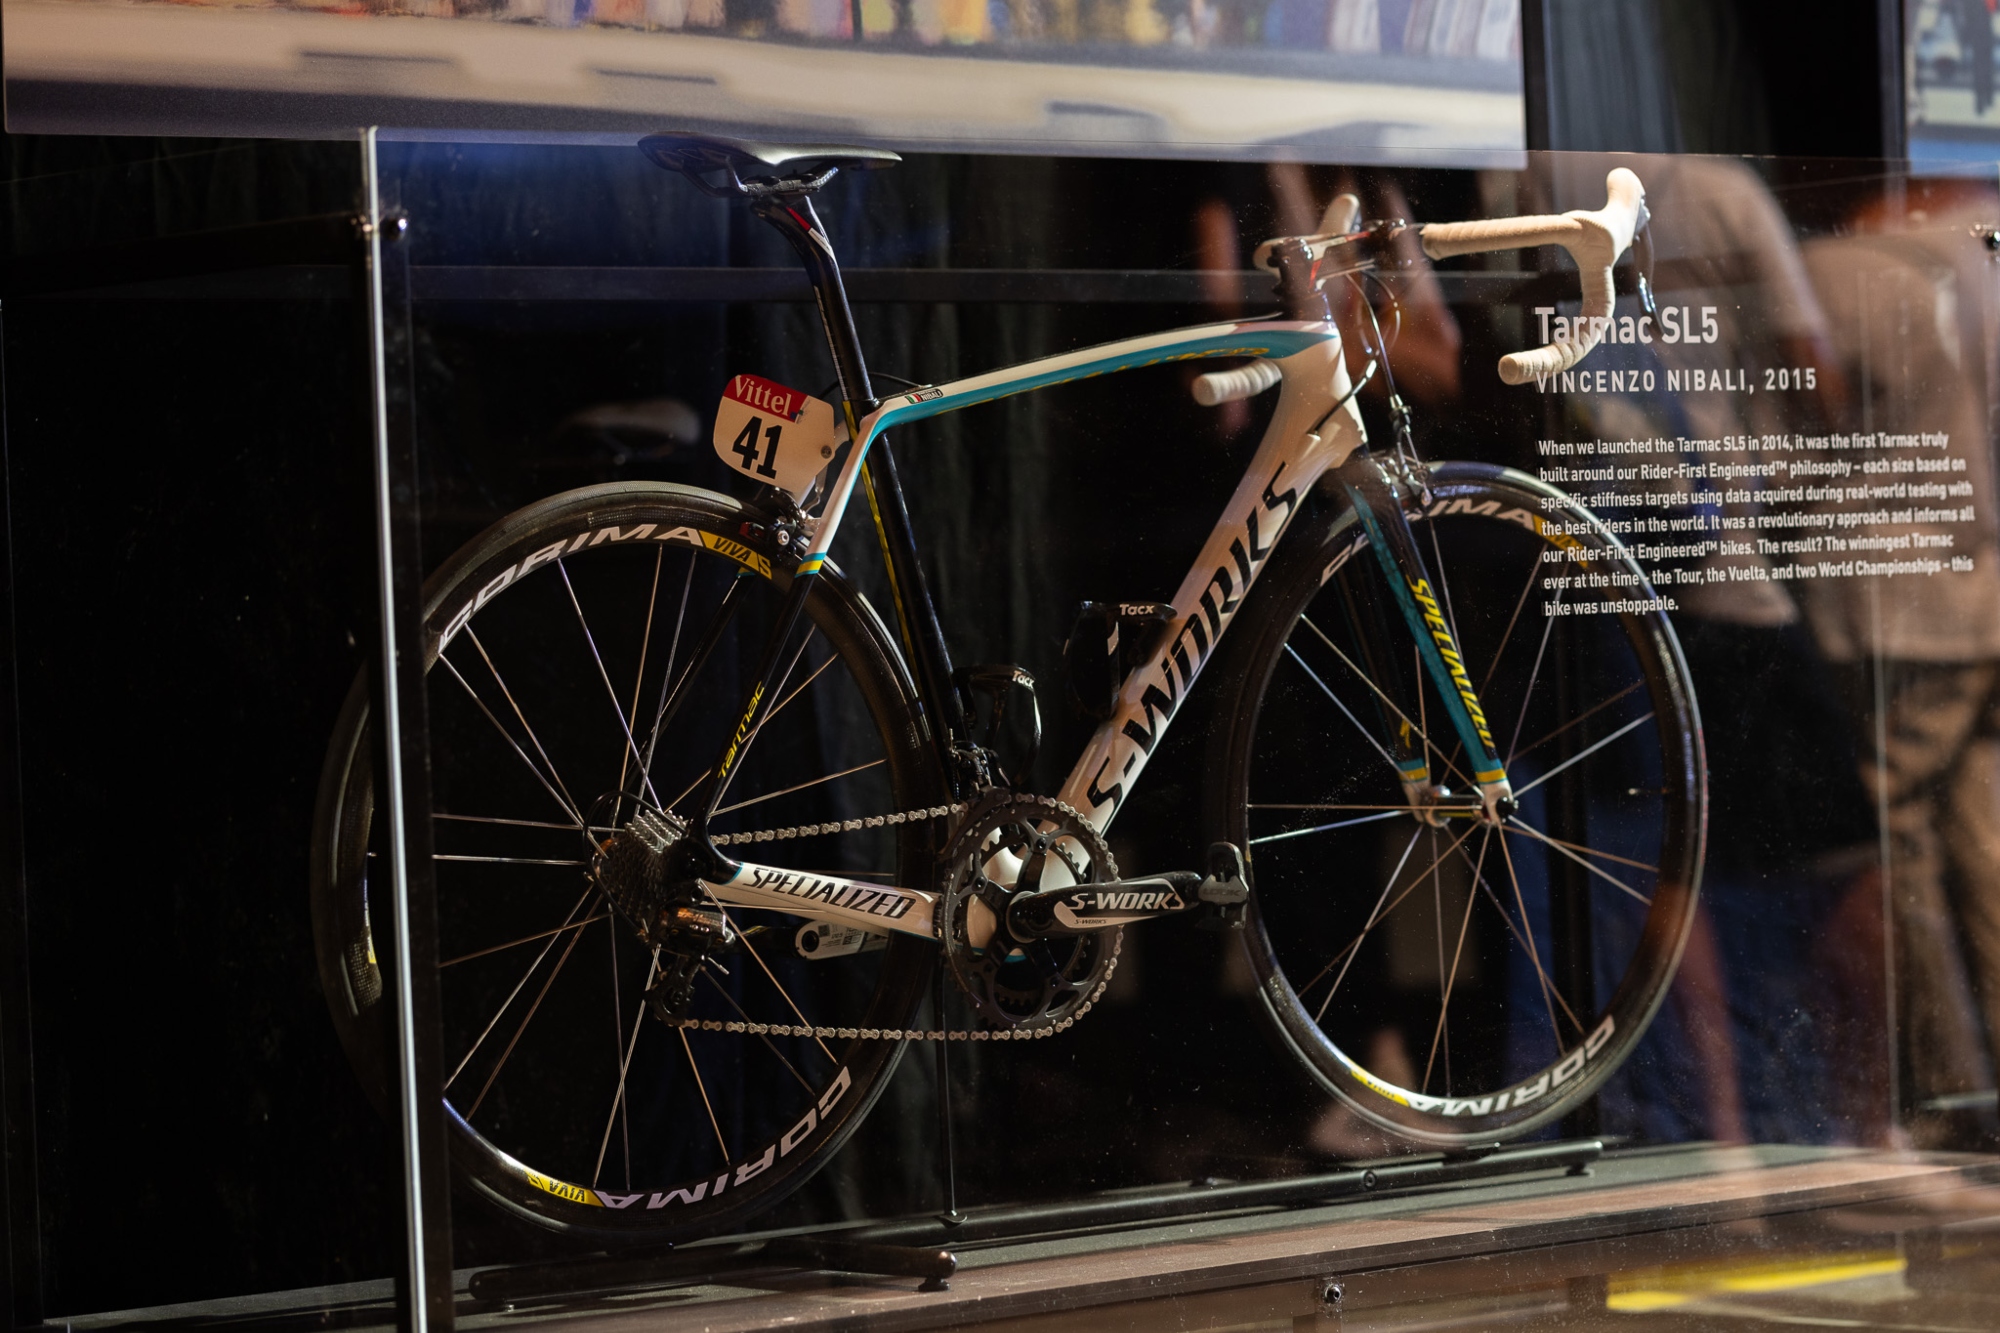 Vincenzo Nibali's Specialized S-Works Tarmac SL5 in a display case